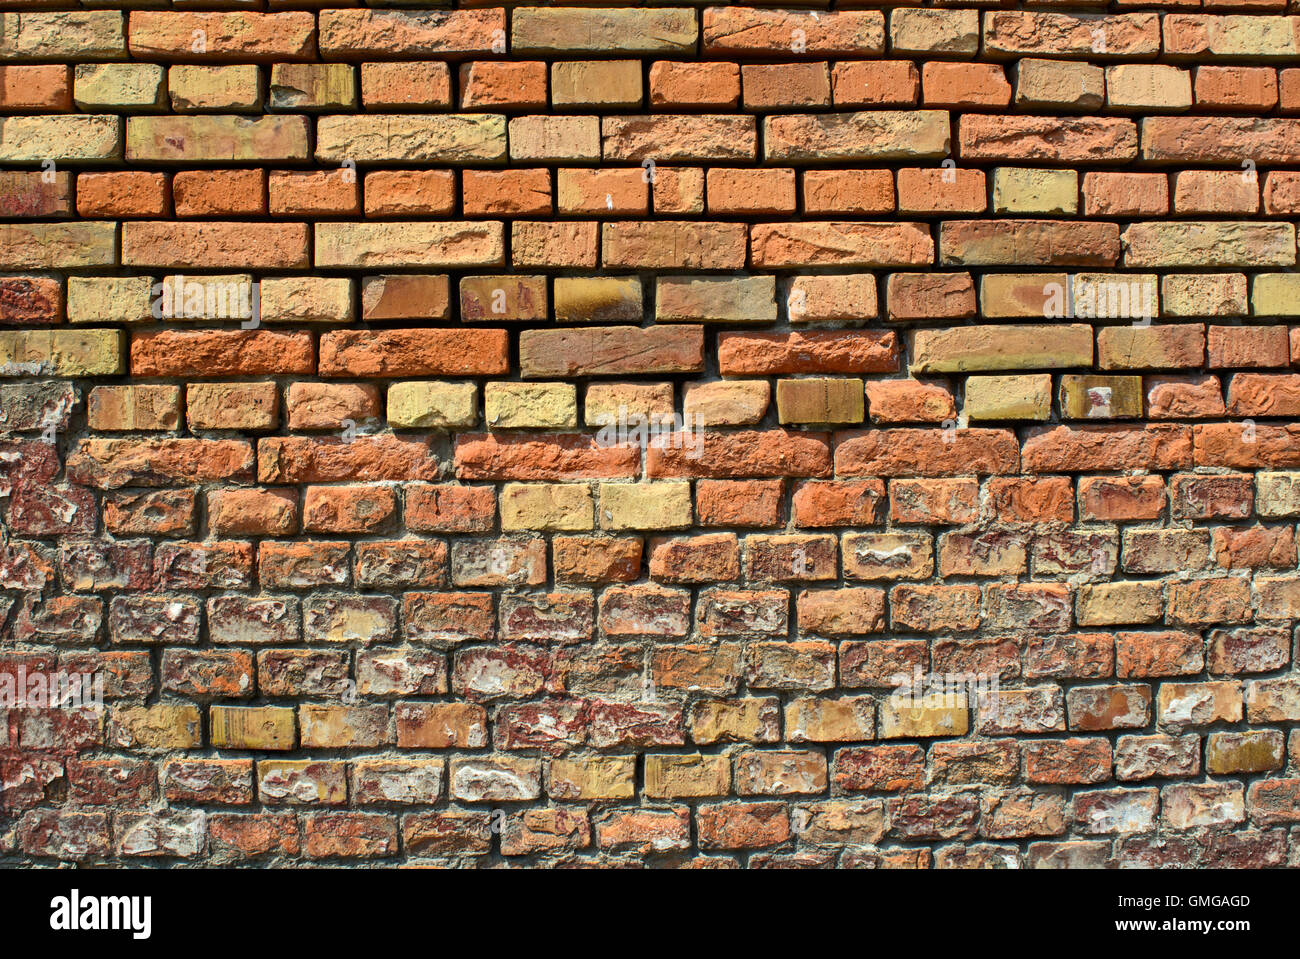 Home cracked old dilapidated brick wall. Stock Photo